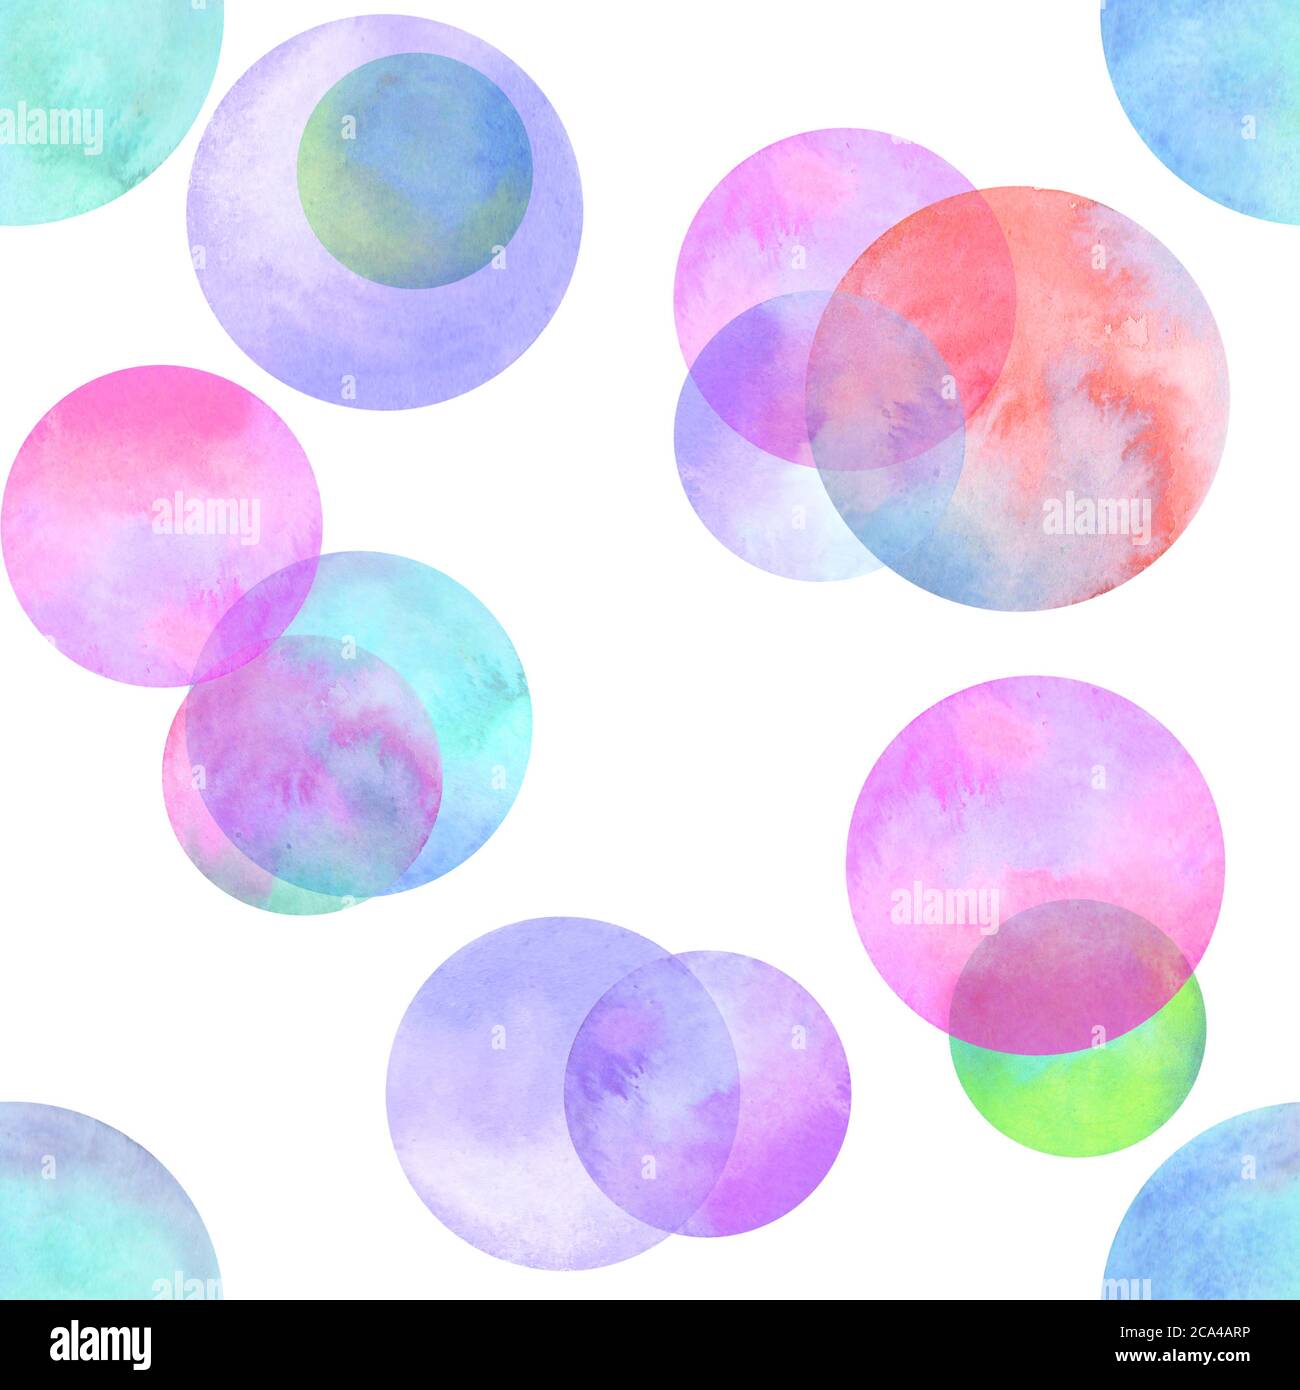 Polka dot multi-colored watercolor seamless pattern. Abstract watercolour background with colorful circles on white. Hand drawn round shaped texture. Stock Photo